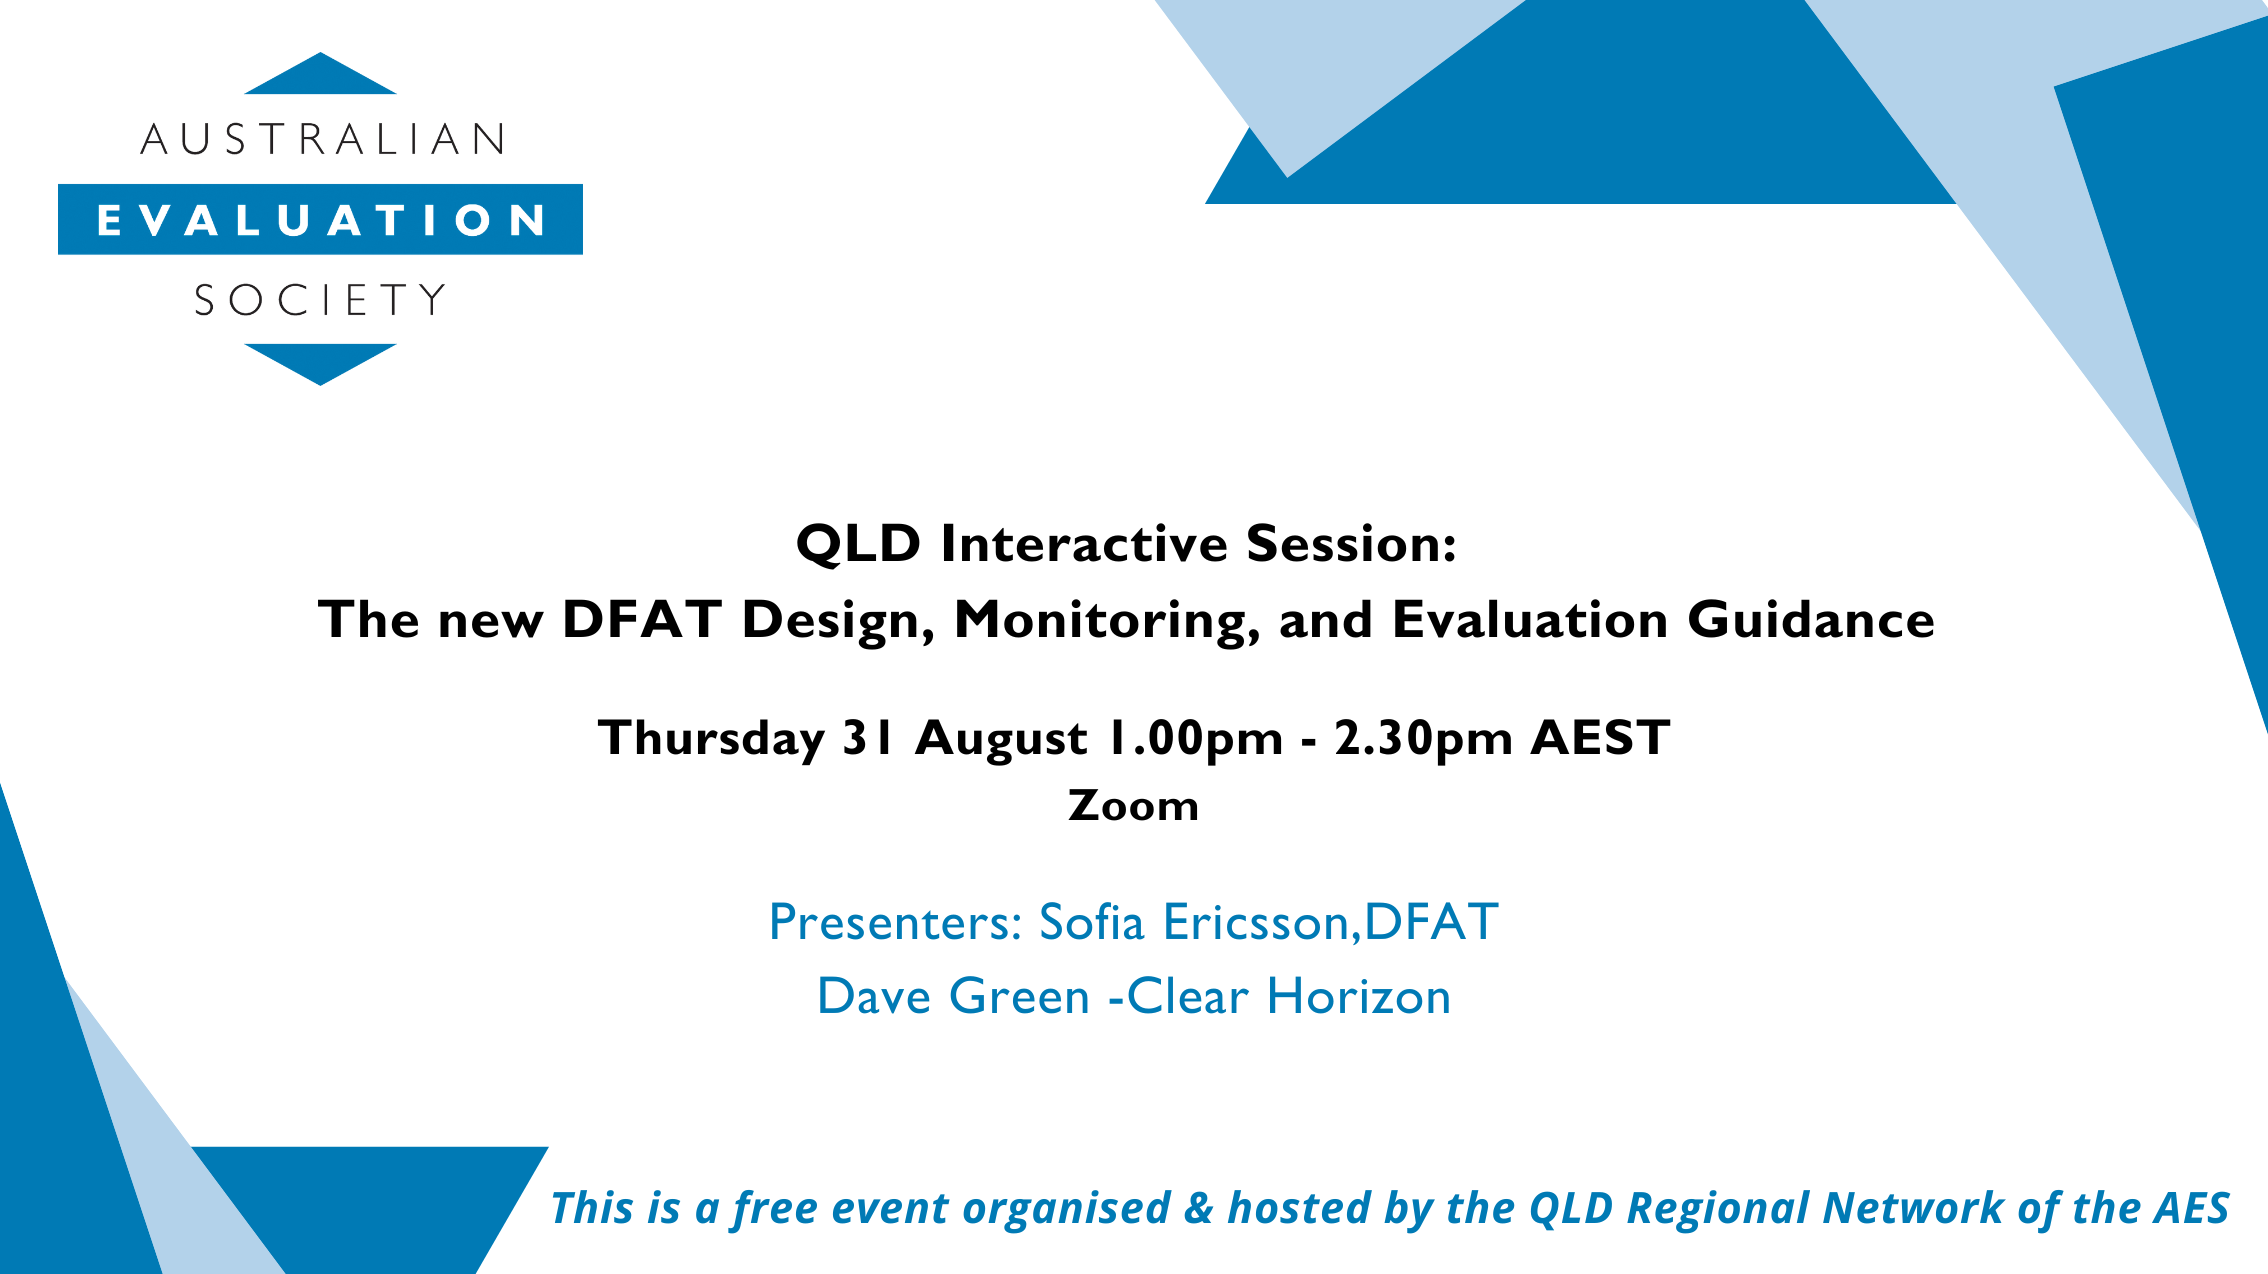 The new DFAT Design Monitoring and Evaluation Guidance 